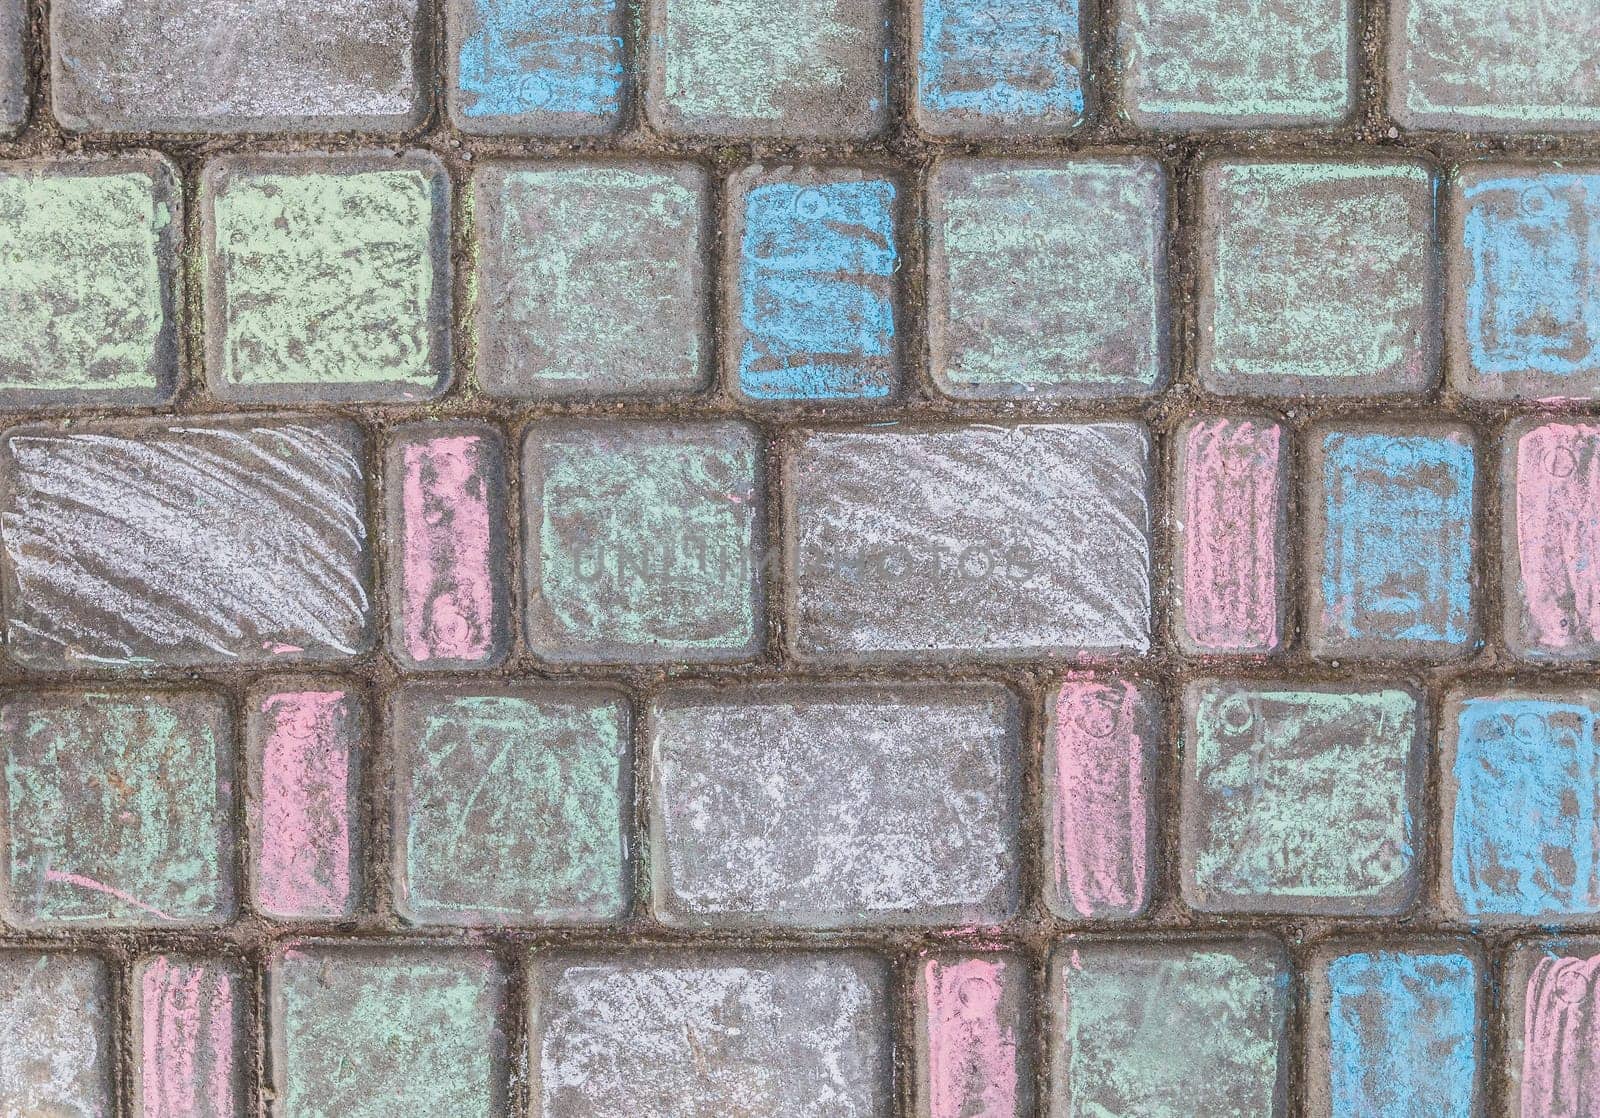 colorful paving slabs, which the children painted with chalk.